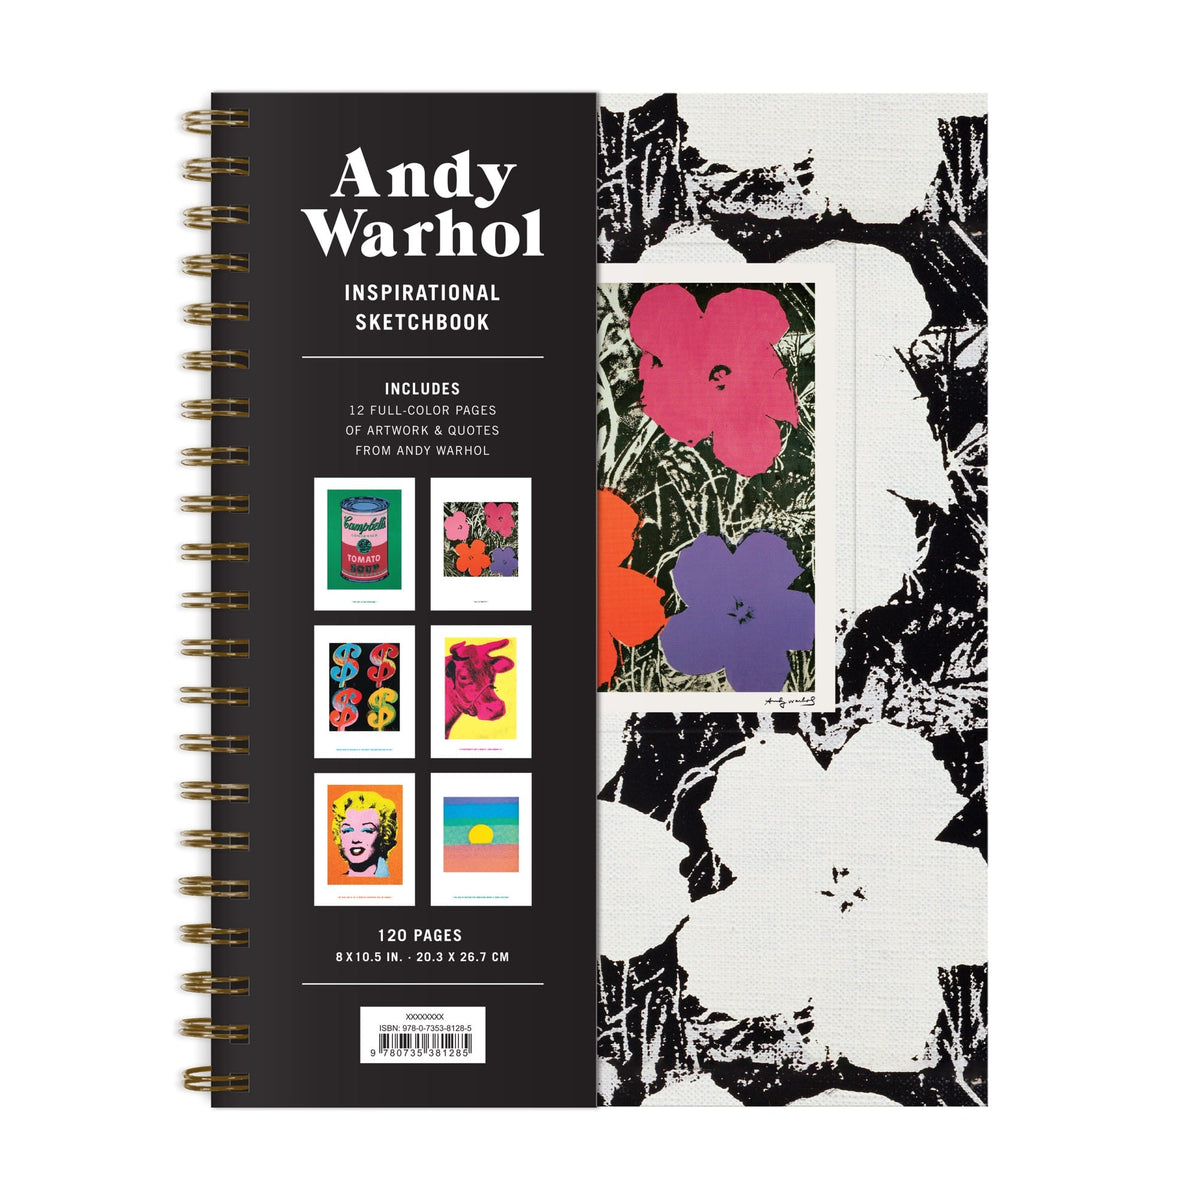 Andy Warhol Inspirational Sketchbook Sketch Book Andy Warhol Foundation For The Visual Arts 